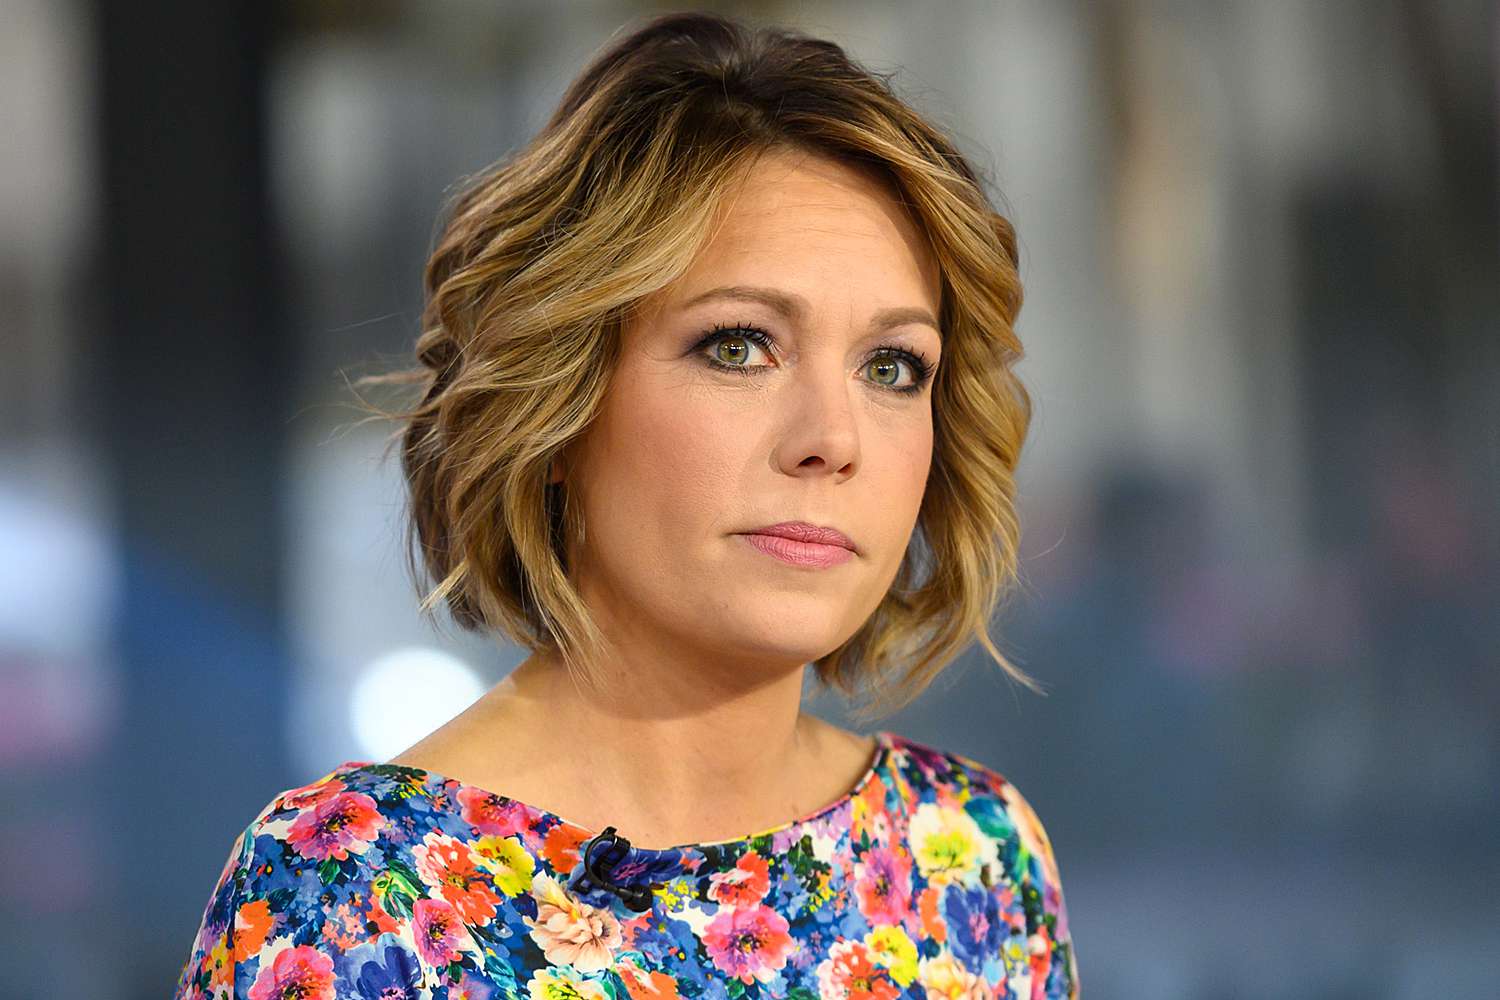 Dylan Dreyer Reveals Sons Were Admitted to Emergency Room with RSV